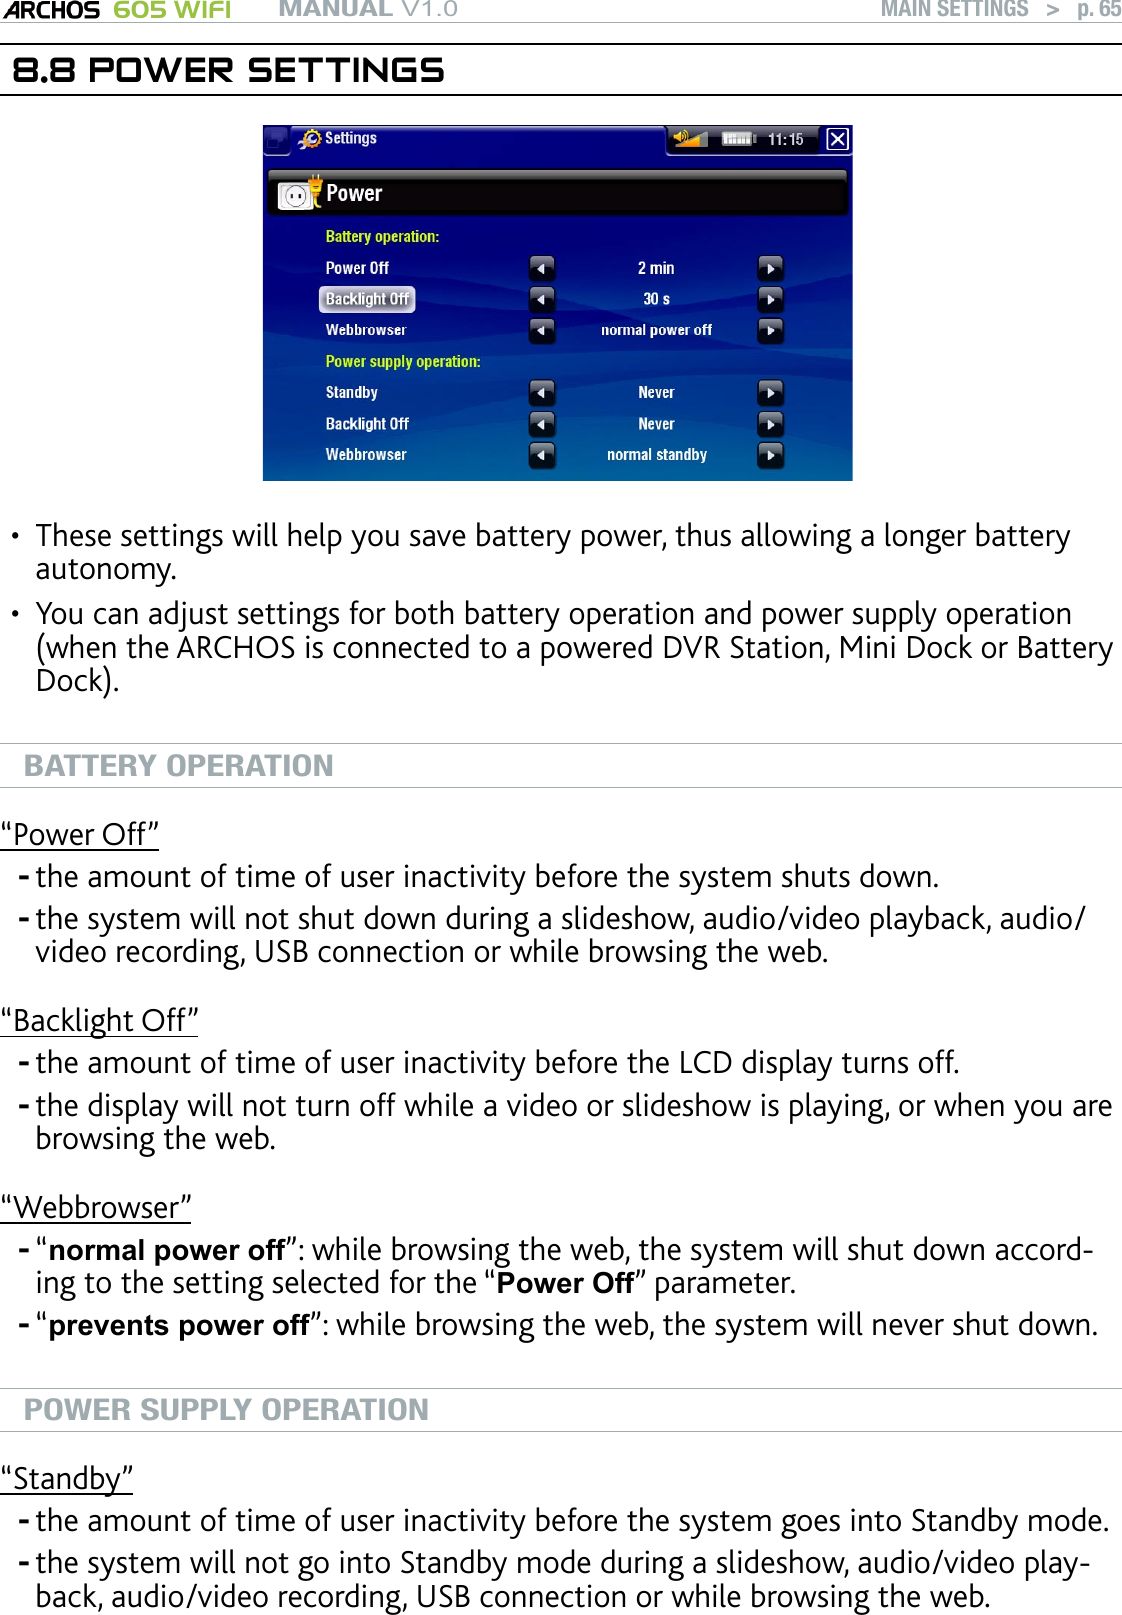 MANUAL V1.0 605 WIFI MAIN SETTINGS   &gt;   p. 658.8 POWER SETTINGSThese settings will help you save battery power, thus allowing a longer battery autonomy.You can adjust settings for both battery operation and power supply operation (when the ARCHOS is connected to a powered DVR Station, Mini Dock or Battery Dock).BATTERY OPERATION“Power Off”the amount of time of user inactivity before the system shuts down.the system will not shut down during a slideshow, audio/video playback, audio/video recording, USB connection or while browsing the web.“Backlight Off”the amount of time of user inactivity before the LCD display turns off.the display will not turn off while a video or slideshow is playing, or when you are browsing the web.“Webbrowser”“normal power off”: while browsing the web, the system will shut down accord-ing to the setting selected for the “Power Off” parameter.“prevents power off”: while browsing the web, the system will never shut down.POWER SUPPLY OPERATION“Standby”the amount of time of user inactivity before the system goes into Standby mode.the system will not go into Standby mode during a slideshow, audio/video play-back, audio/video recording, USB connection or while browsing the web.••--------